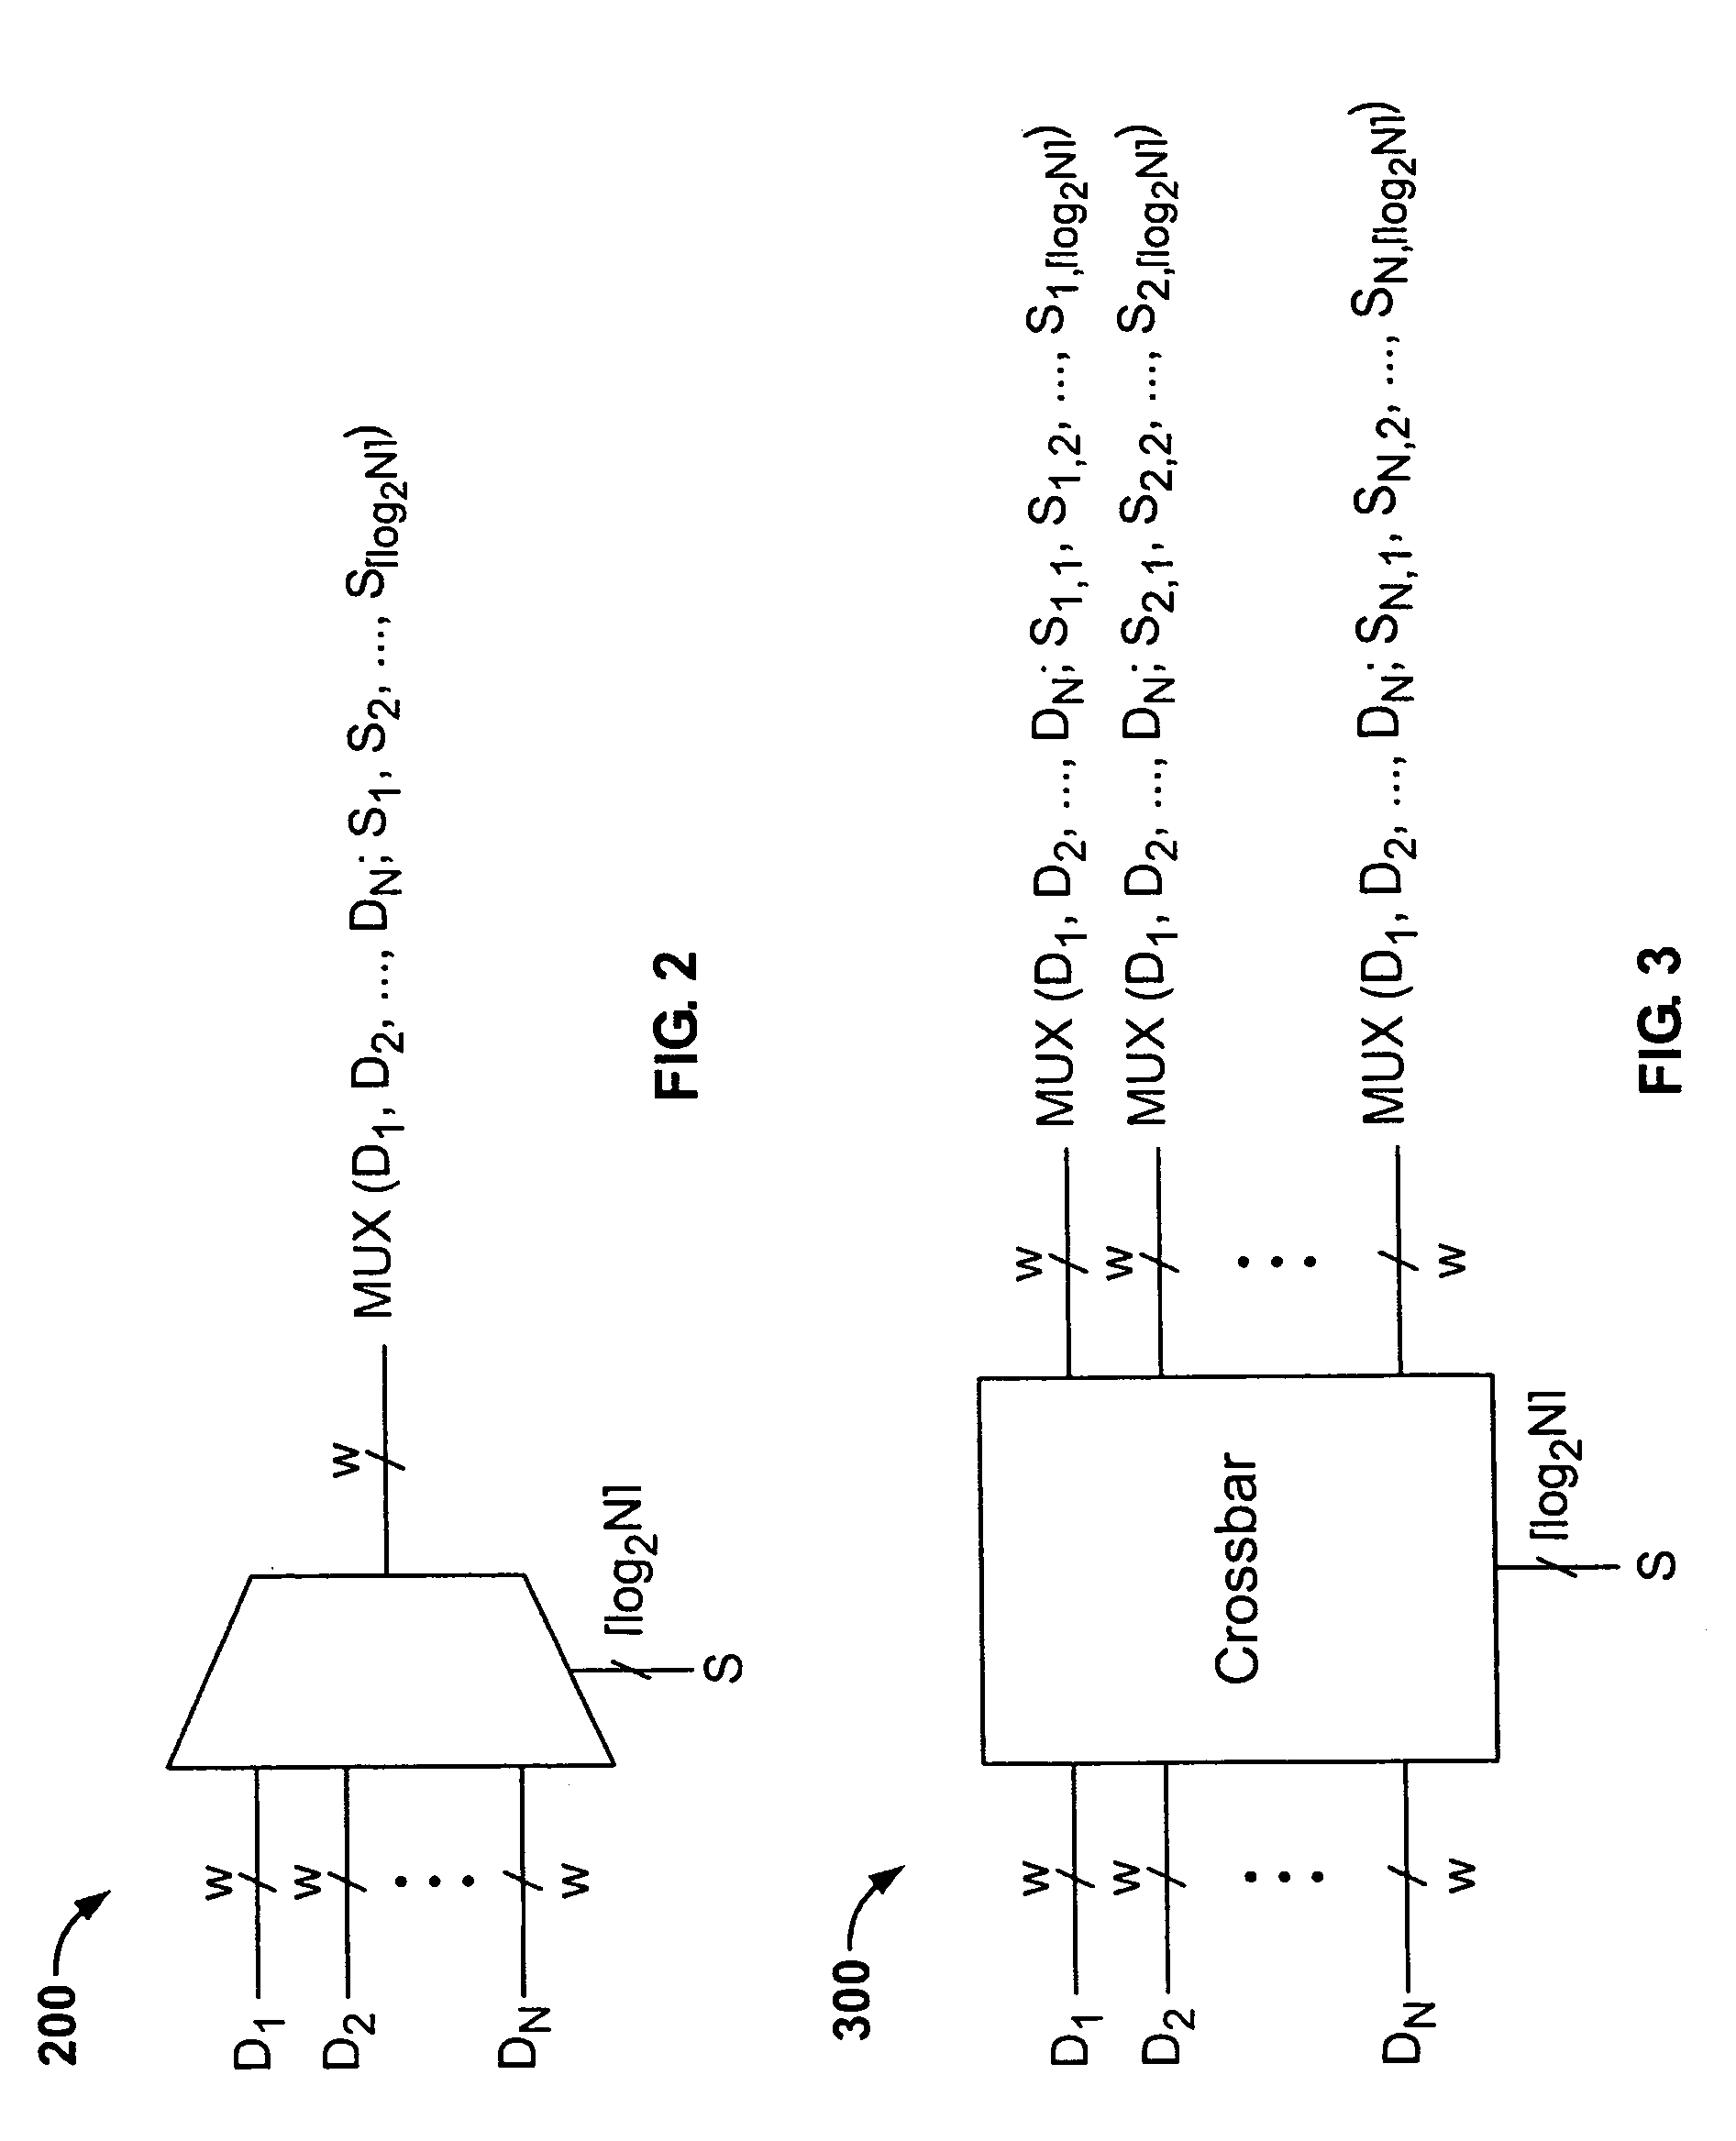 Dedicated crossbar and barrel shifter block on programmable logic resources